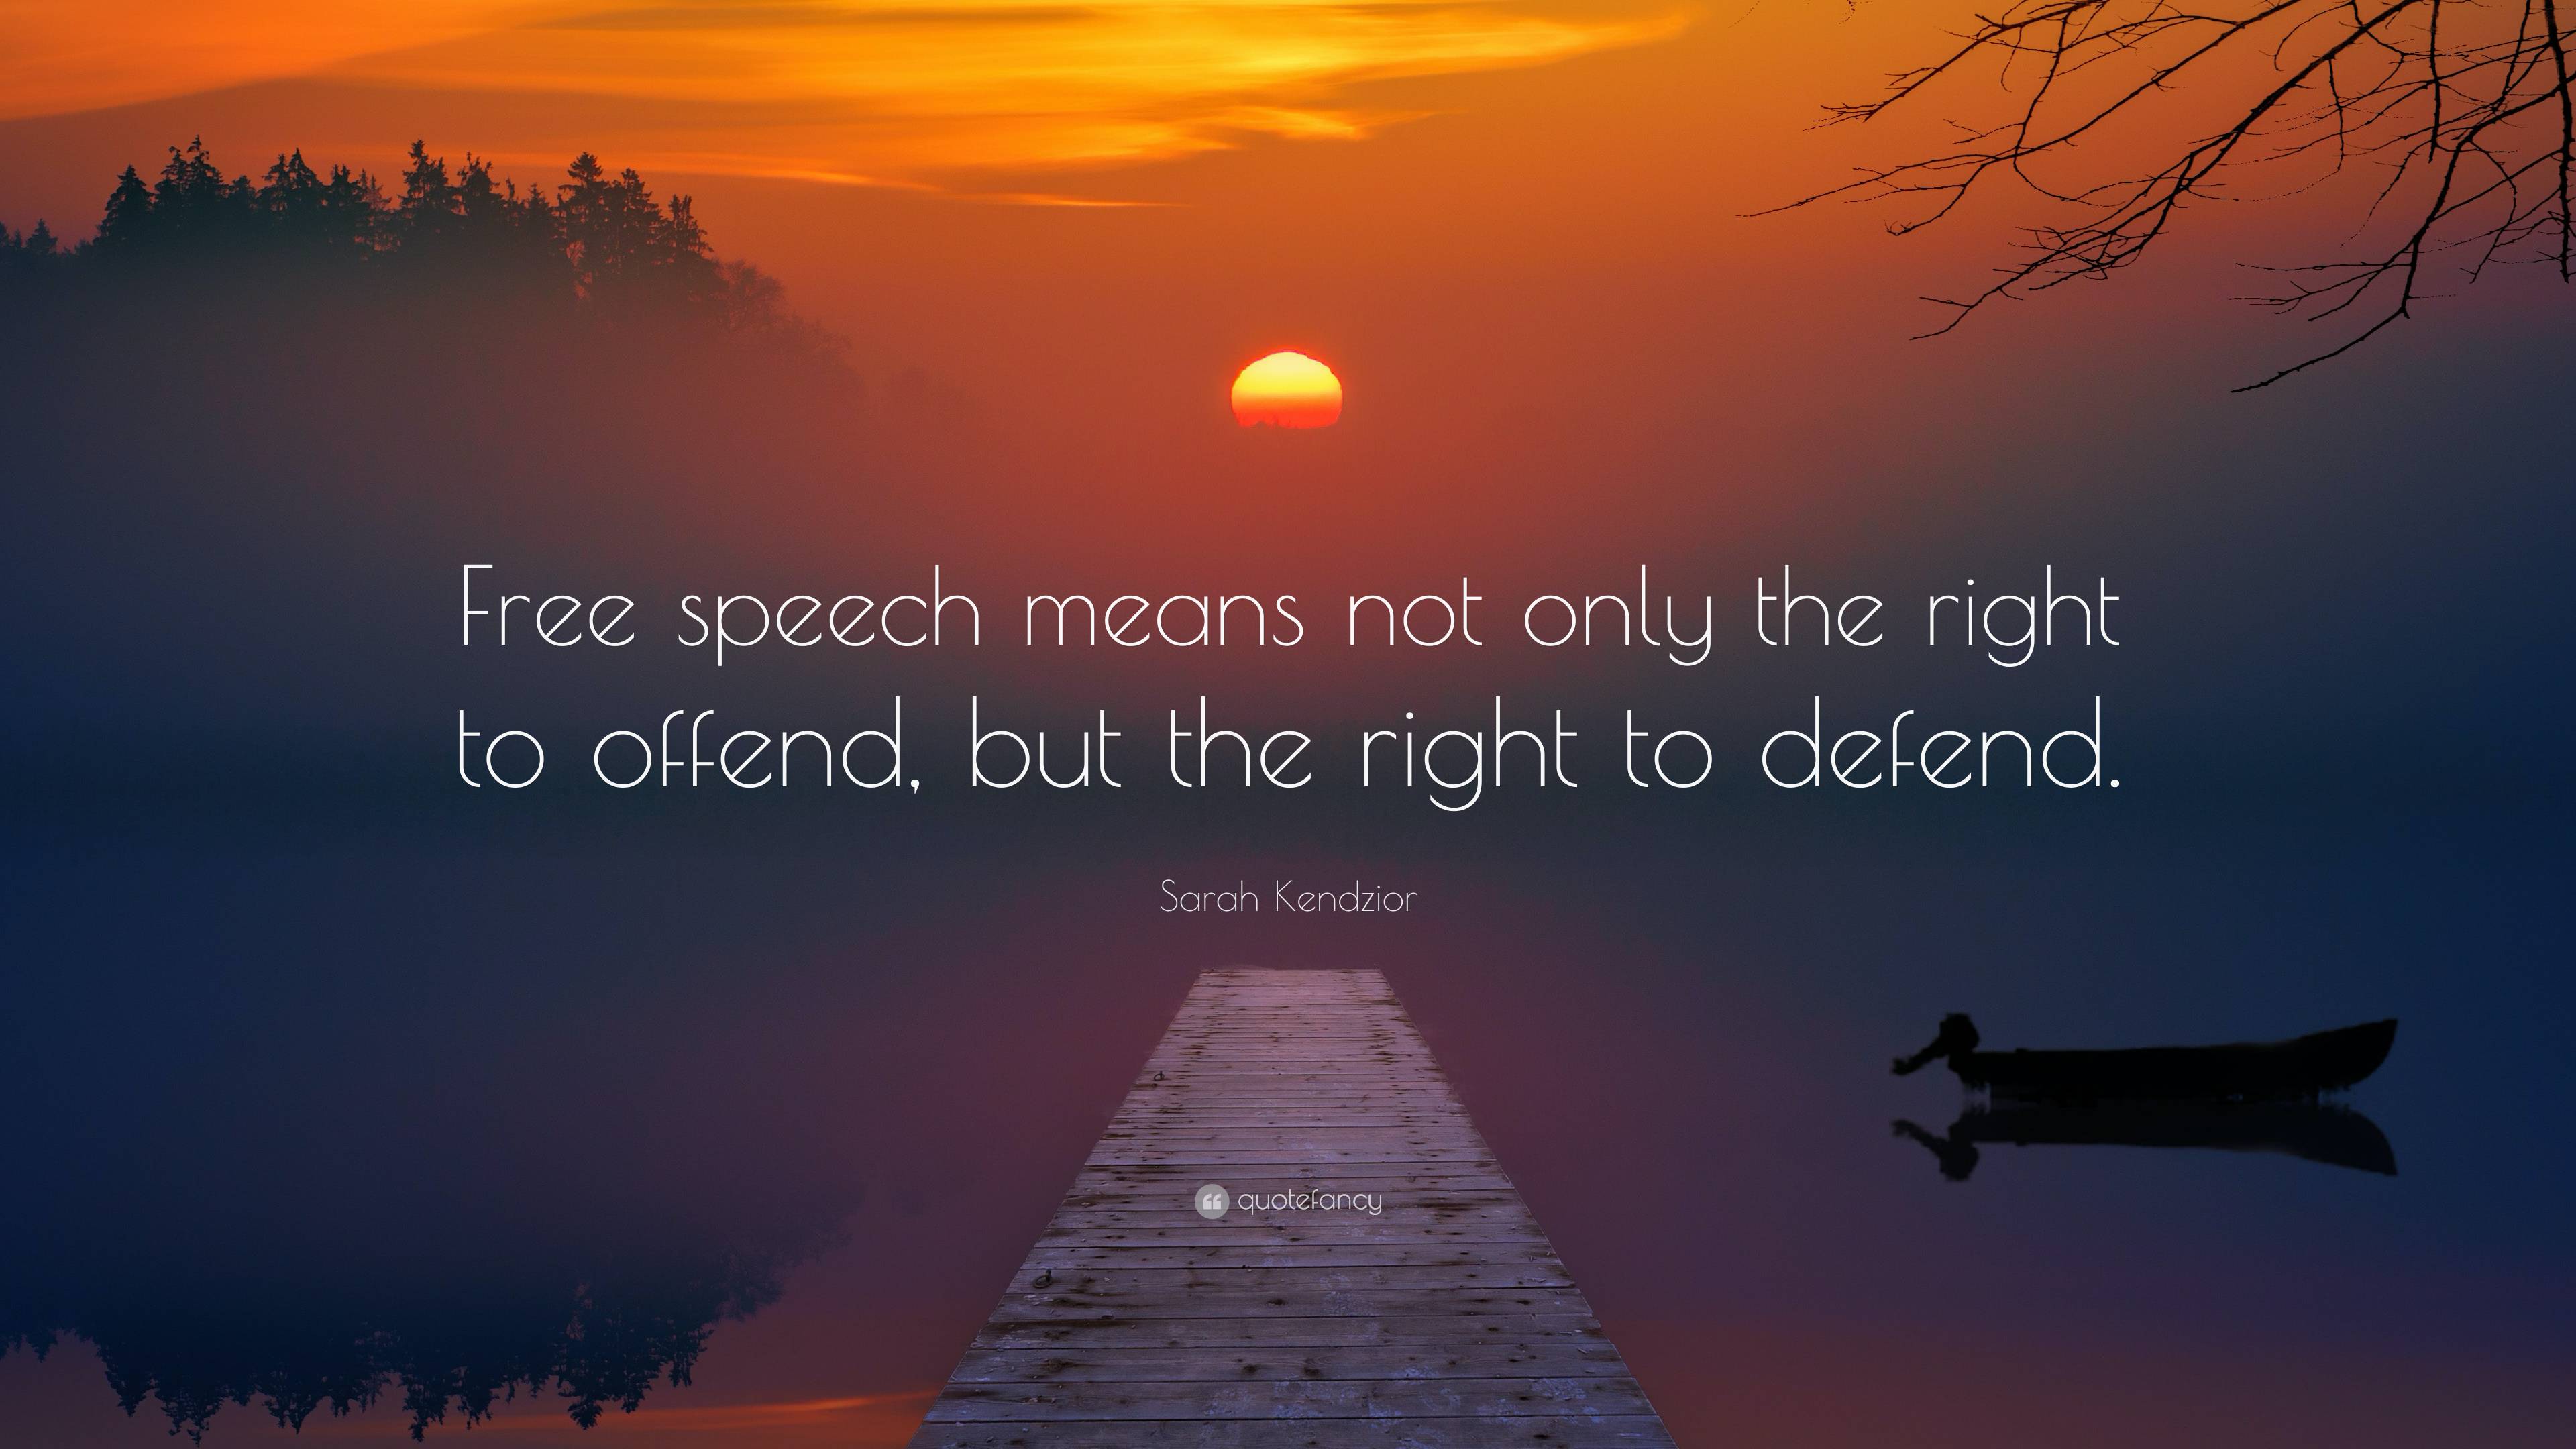 Right to free speech does not confer right to tarnish someone's